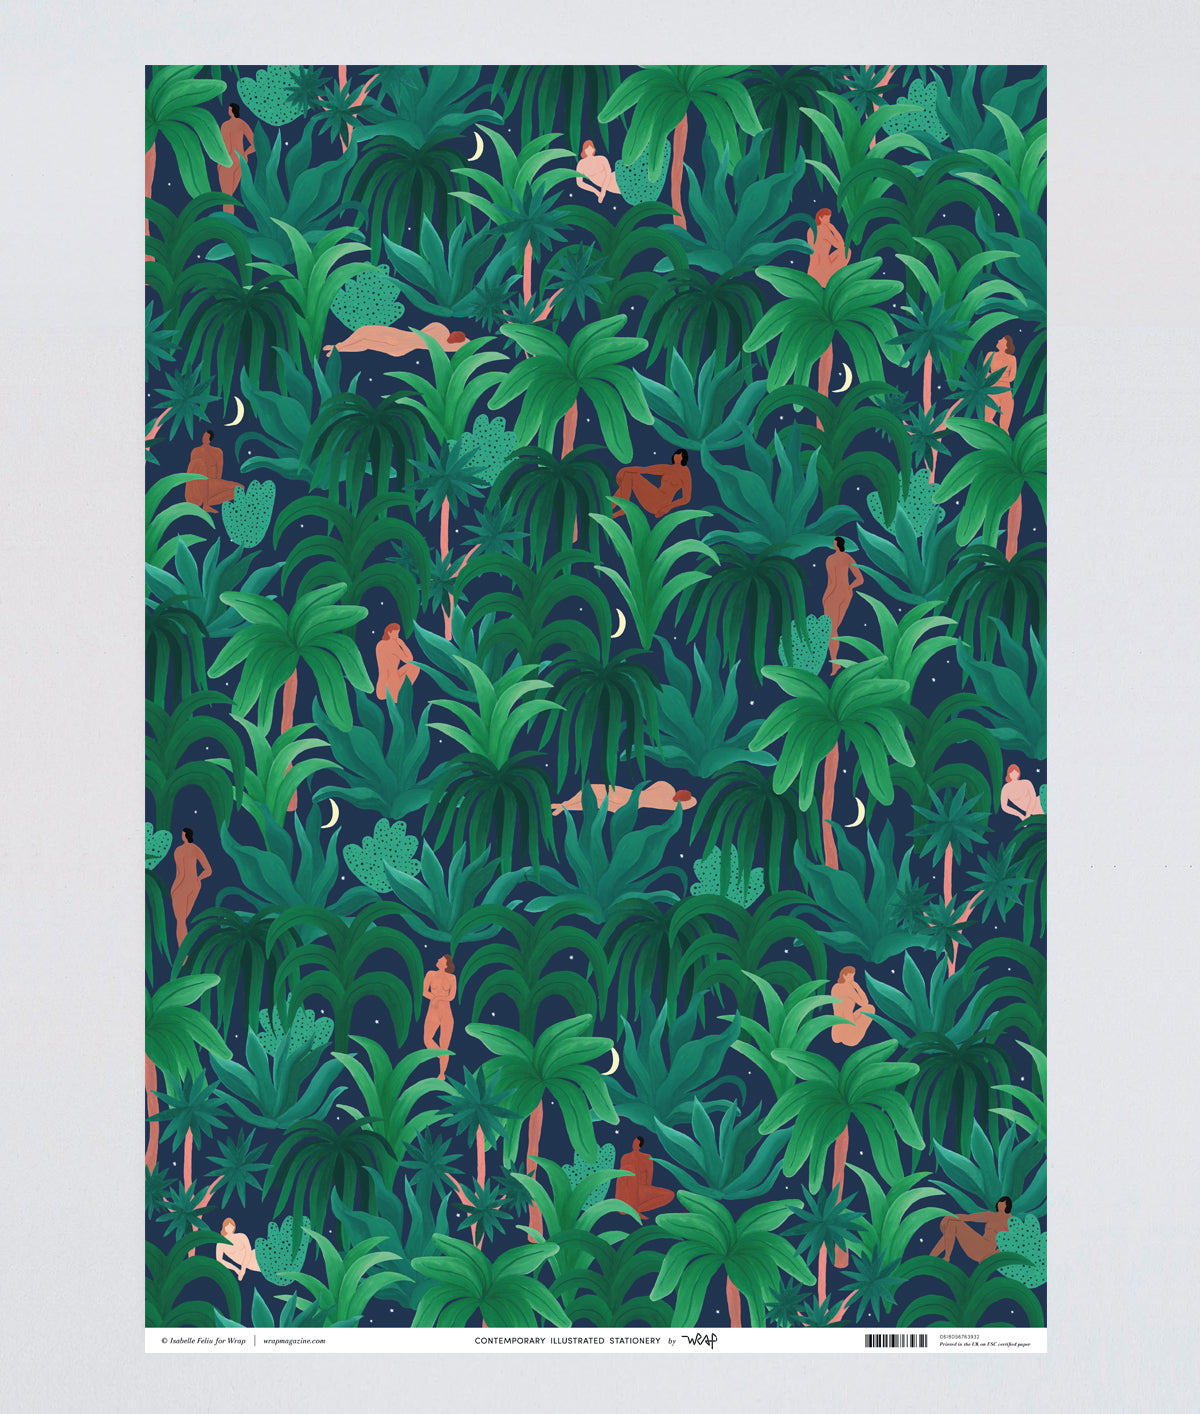 Night Jungle Wrapping Paper Sheets